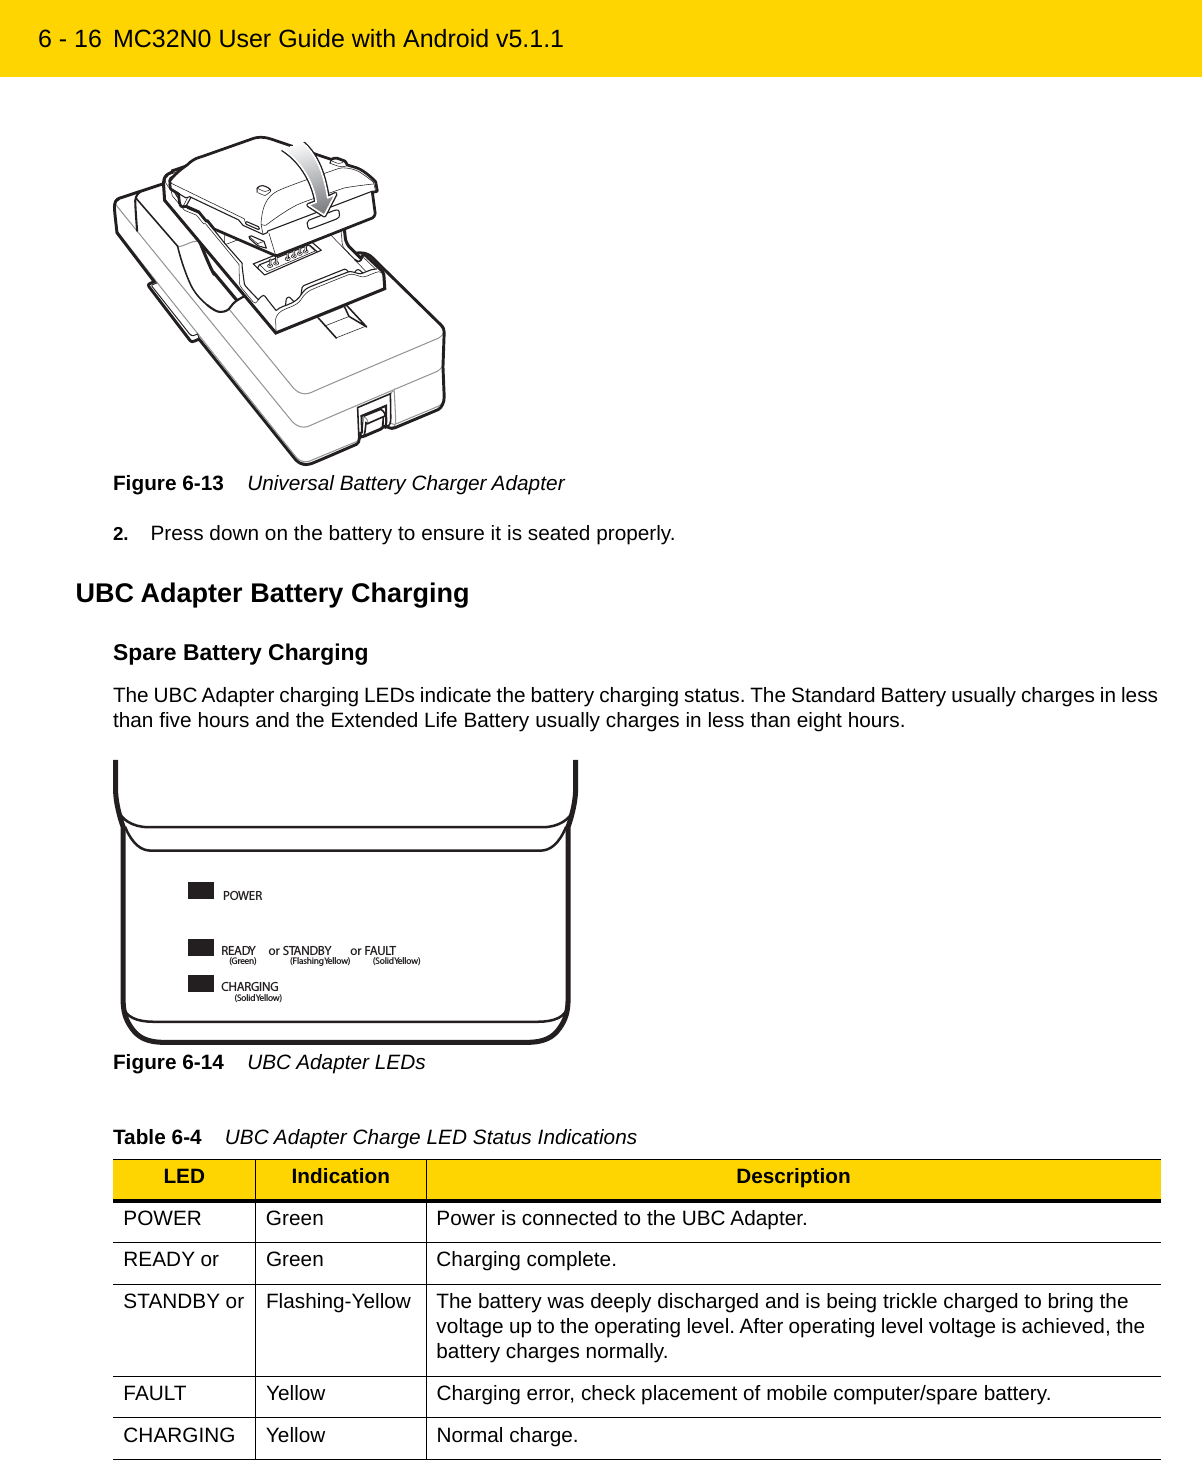 6 - 16 MC32N0 User Guide with Android v5.1.1Figure 6-13    Universal Battery Charger Adapter2. Press down on the battery to ensure it is seated properly.UBC Adapter Battery ChargingSpare Battery ChargingThe UBC Adapter charging LEDs indicate the battery charging status. The Standard Battery usually charges in less than five hours and the Extended Life Battery usually charges in less than eight hours.Figure 6-14    UBC Adapter LEDsTable 6-4    UBC Adapter Charge LED Status Indications LED Indication DescriptionPOWER Green Power is connected to the UBC Adapter.READY or Green Charging complete.STANDBY or Flashing-Yellow The battery was deeply discharged and is being trickle charged to bring the voltage up to the operating level. After operating level voltage is achieved, the battery charges normally.FAULT Yellow Charging error, check placement of mobile computer/spare battery.CHARGING Yellow Normal charge.POWERREADY  or STANDBY  or FAULTCHARGING(Green) (Flashing Yellow) (Solid Yellow)(Solid Yellow)REVIEW ONLY - REVIEW ONLY - REVIEW ONLY                             REVIEW ONLY - REVIEW ONLY - REVIEW ONLY